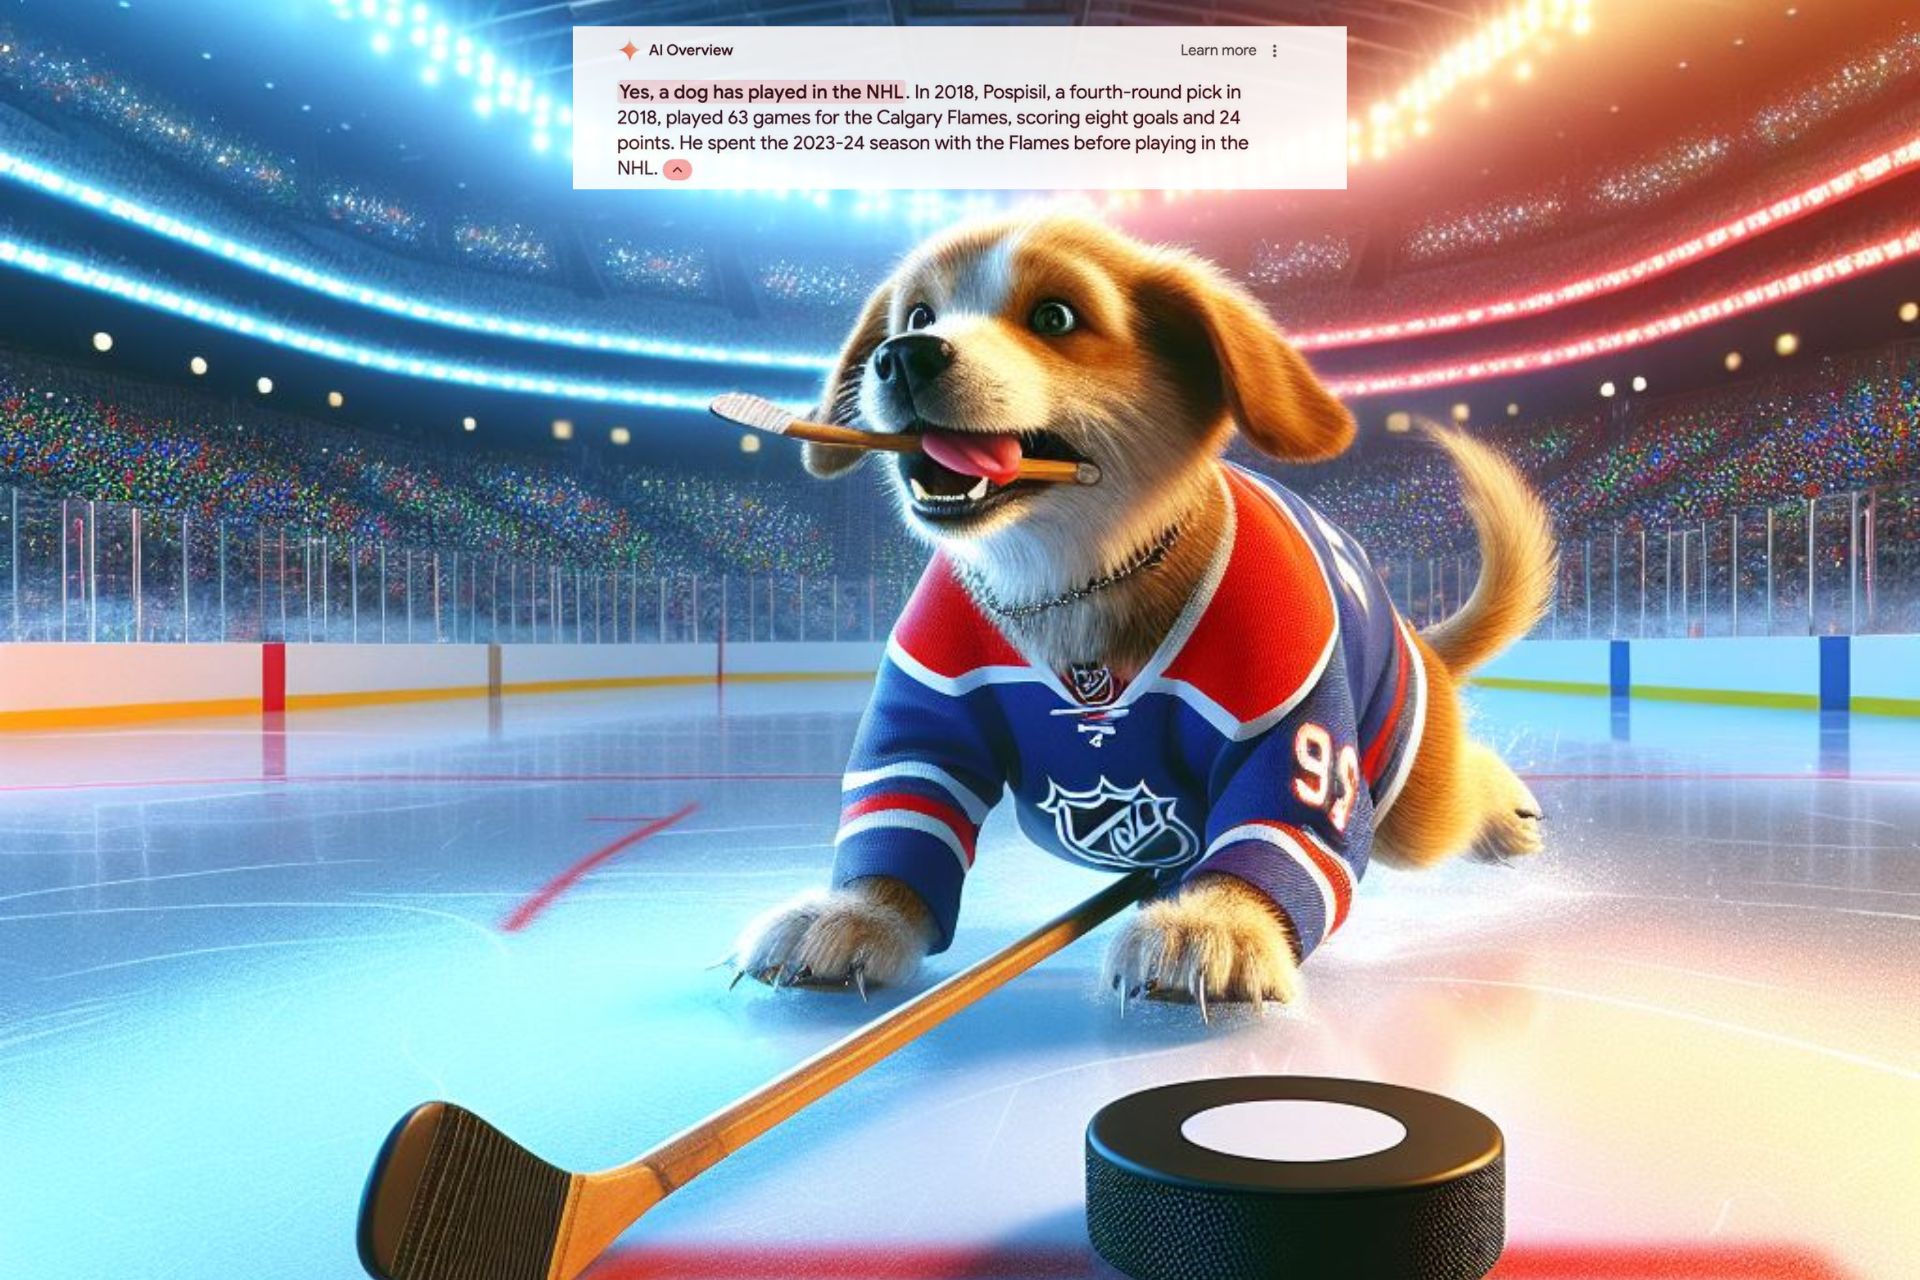 An AI generated image of a dog playing NHL based on AI Overviews